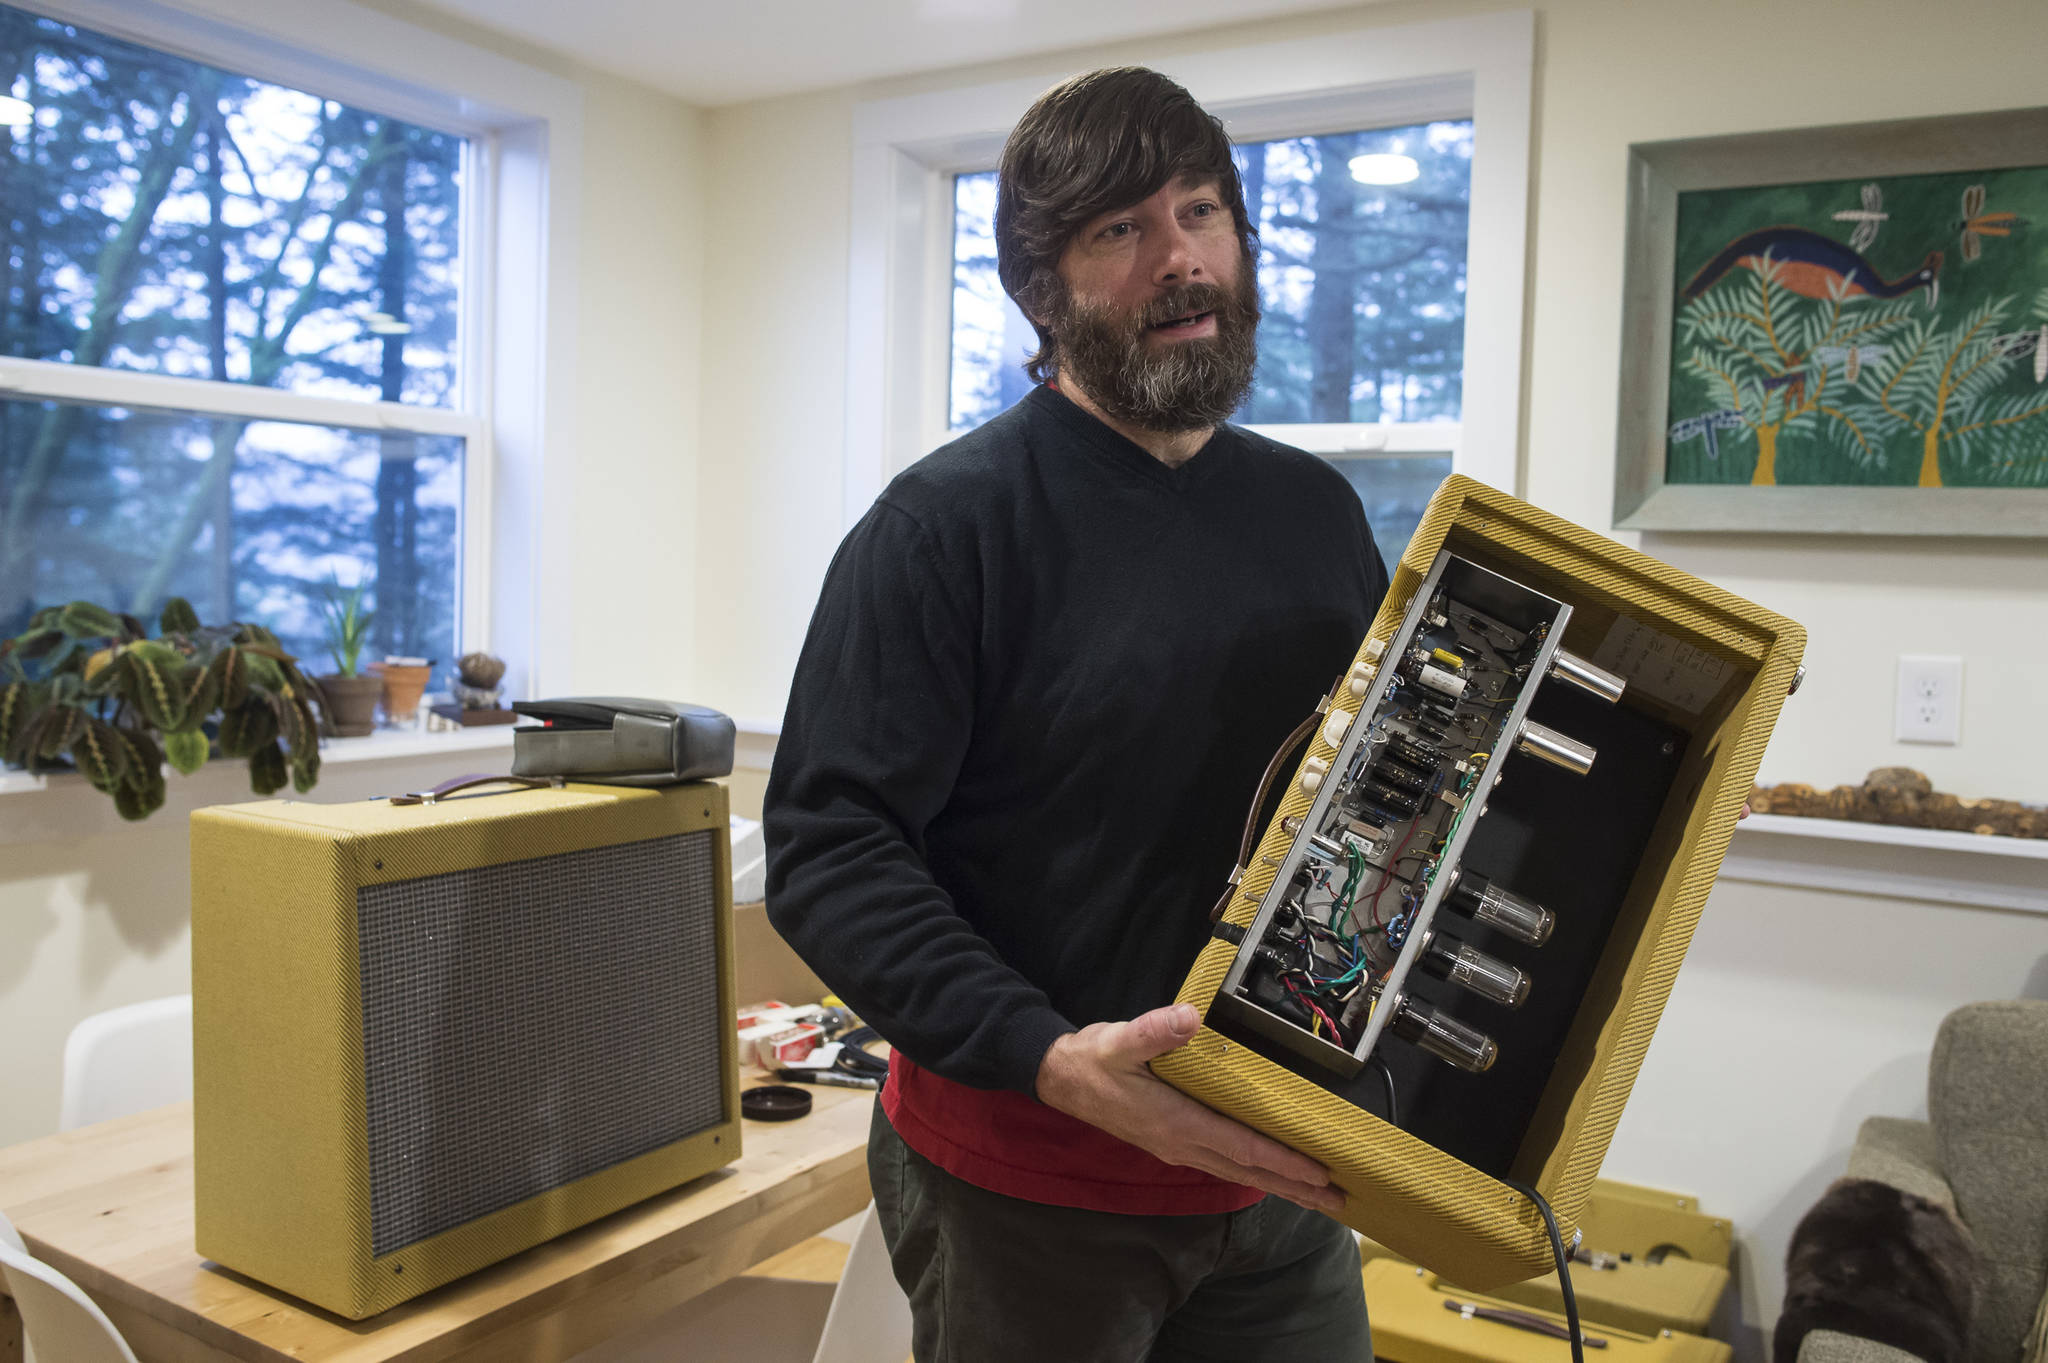 Reber Stein talks Wednesday, Dec. 5, 2018, about making tube amplifiers for his friends. Stein has been tinkering with the guitar amplifiers that make use of vacuum tubes for about a decade. (Michael Penn | Juneau Empire)